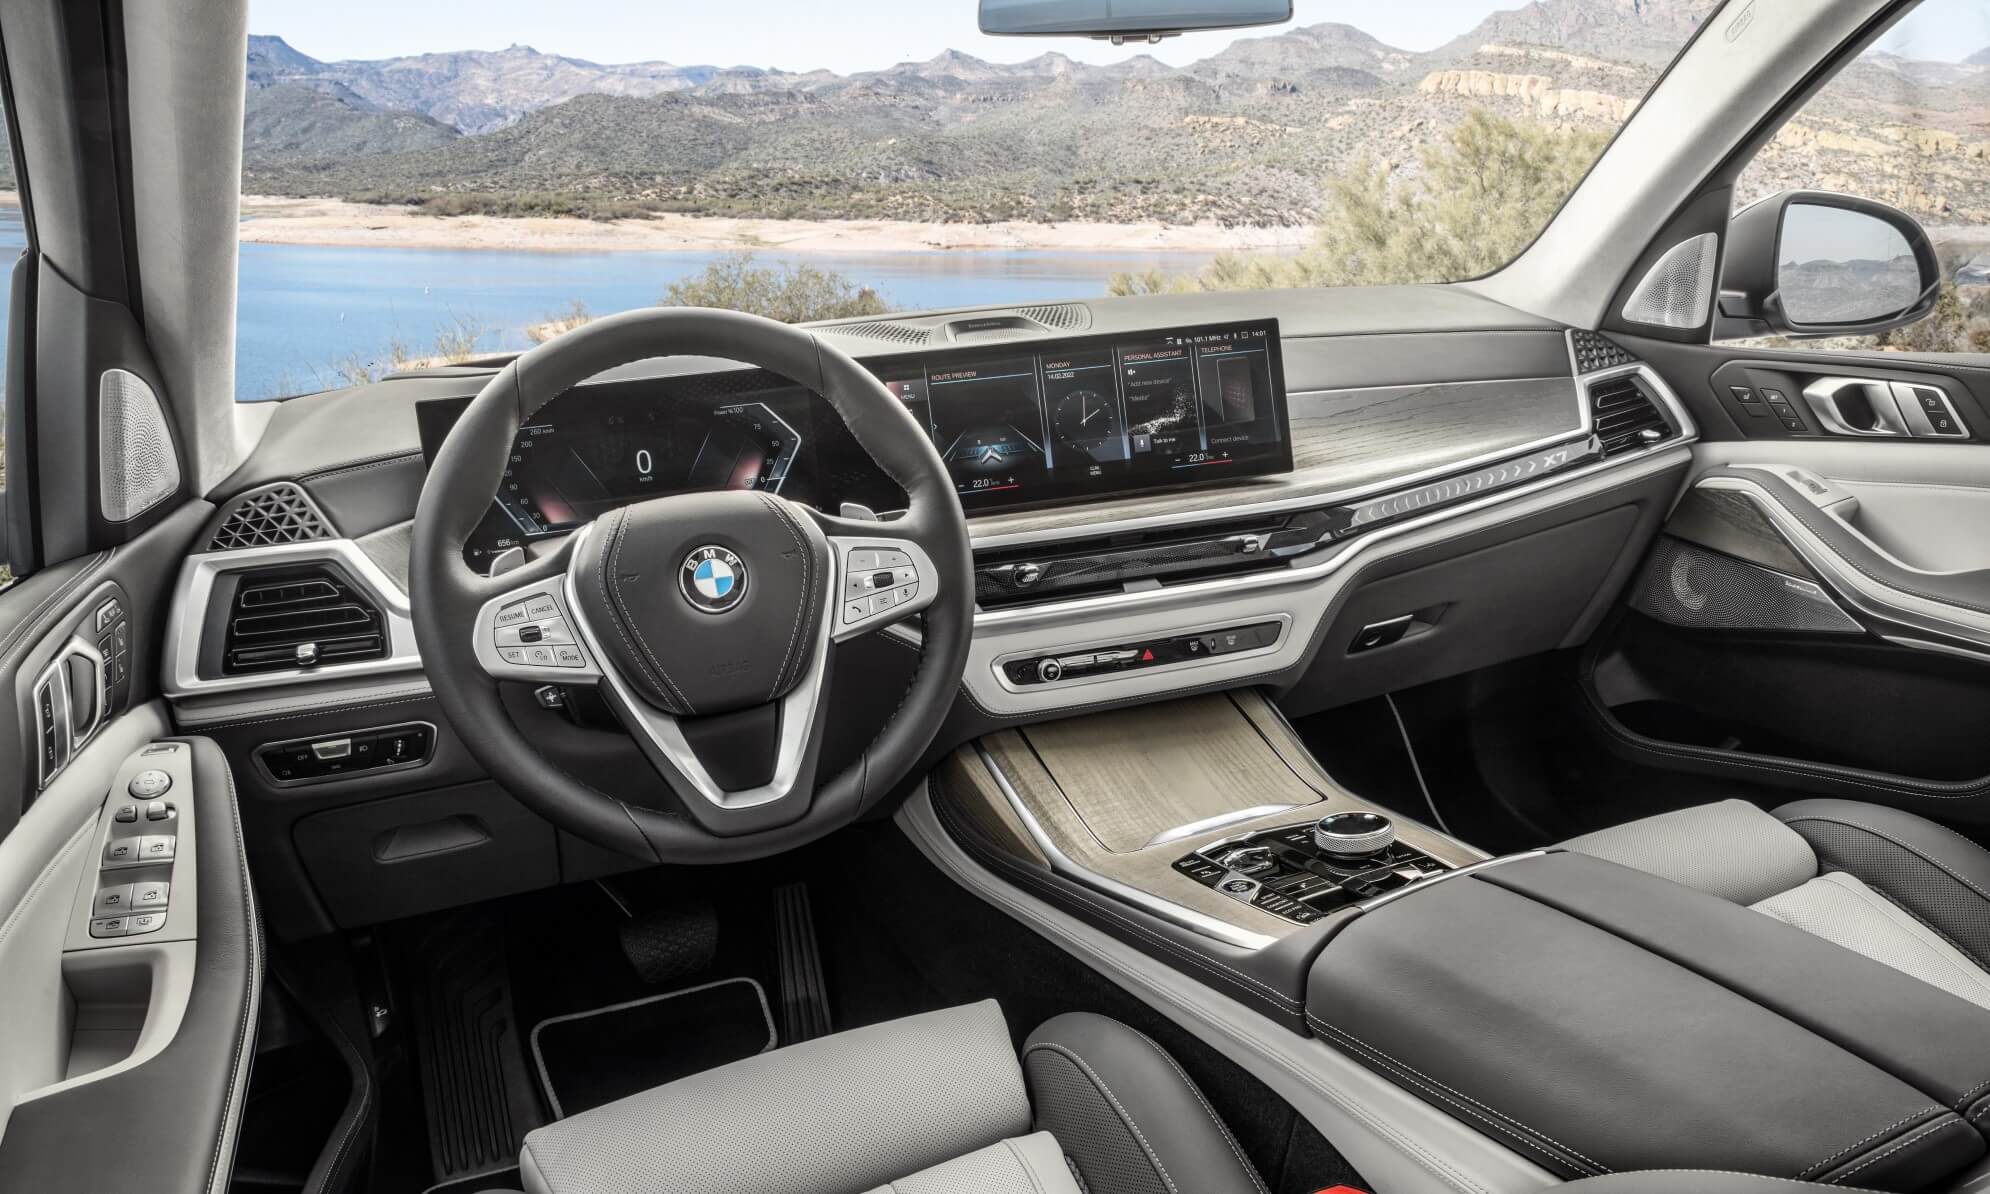 Facelifted BMW X7 interior